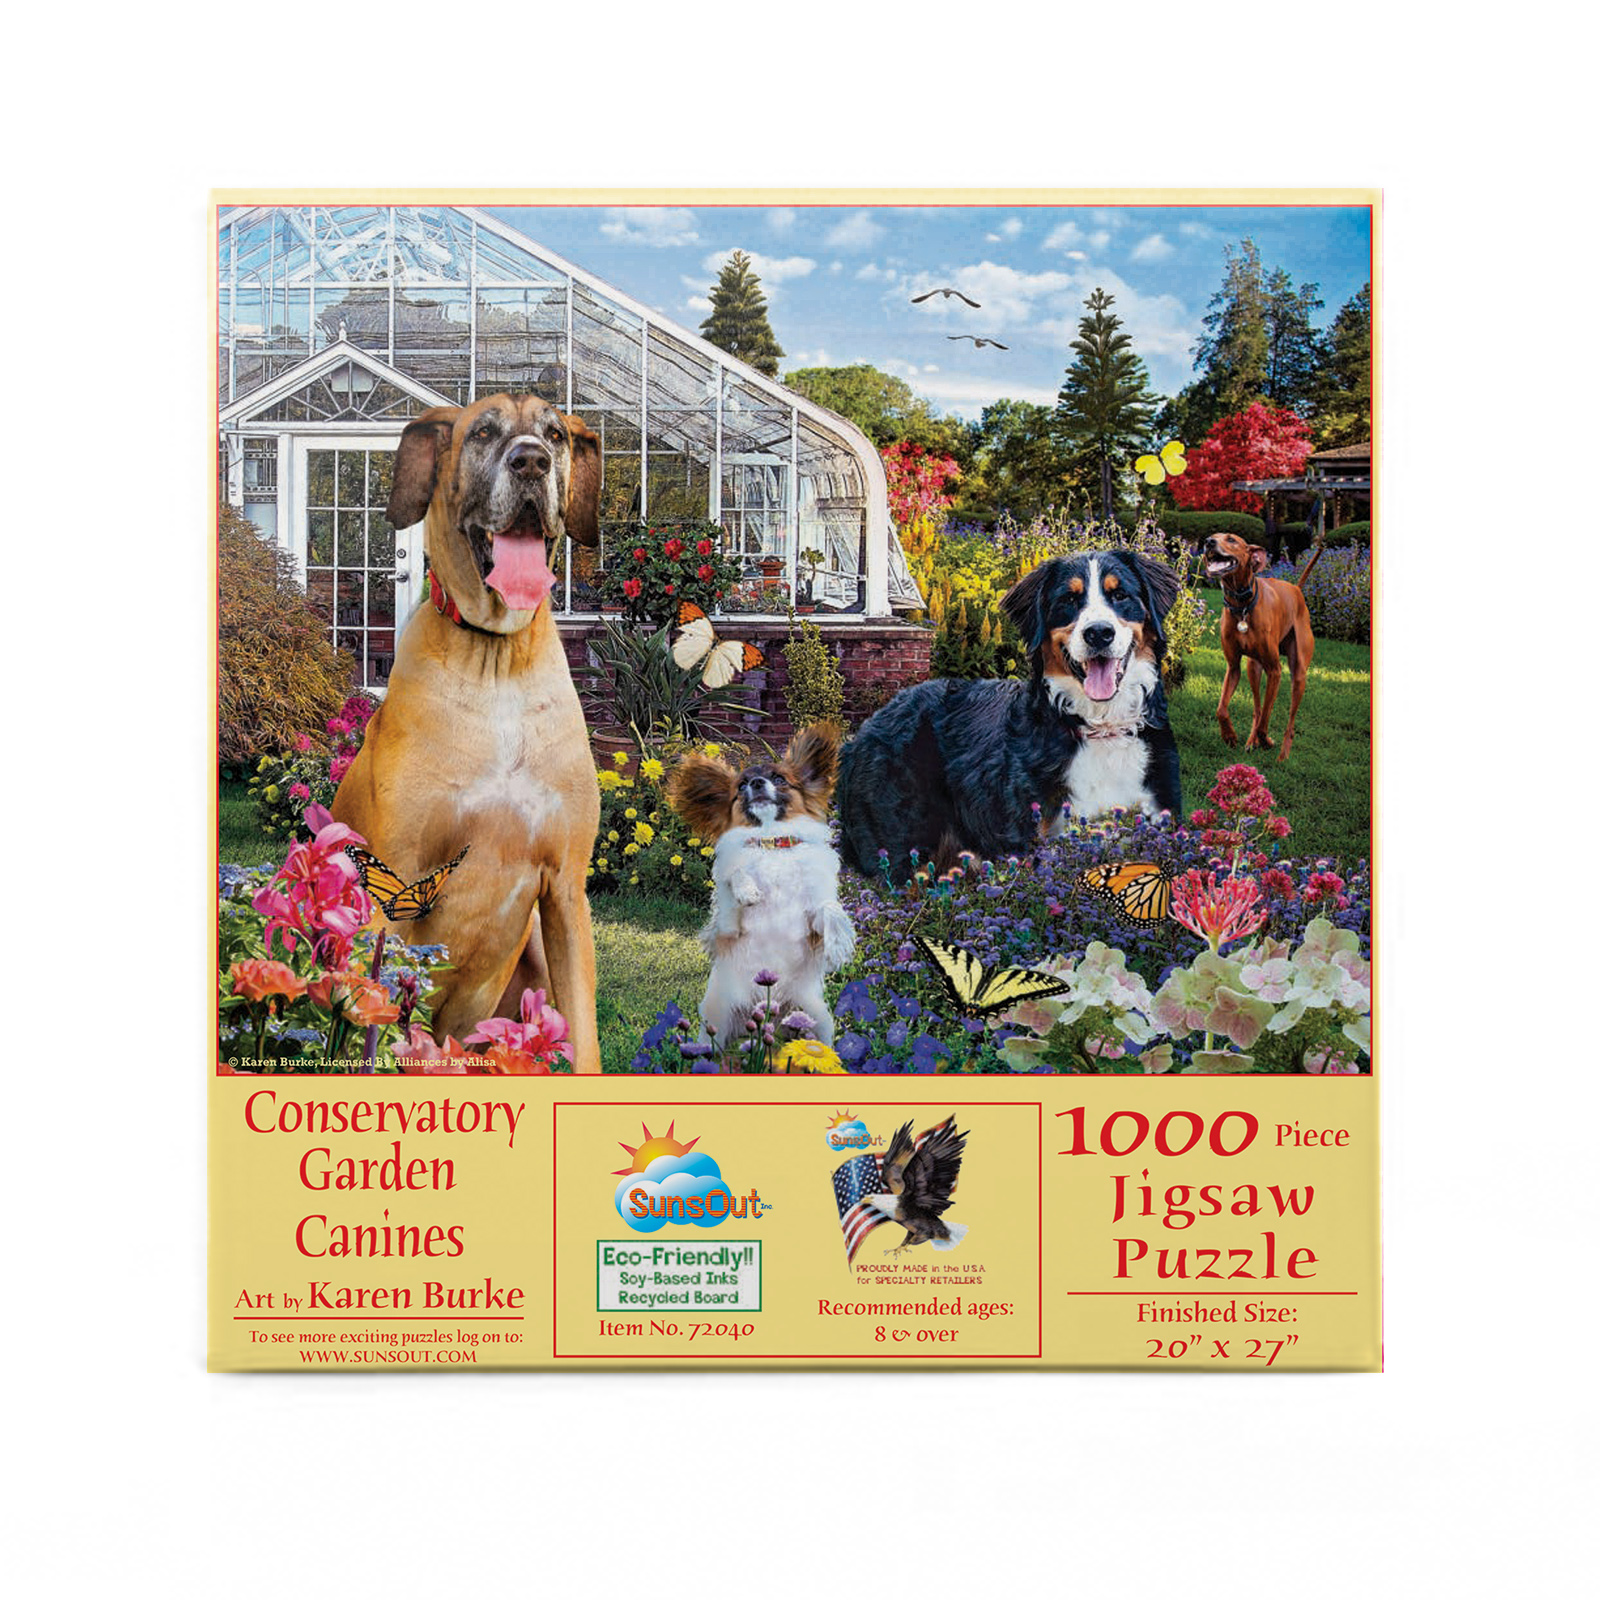 Conservatory Garden Canines